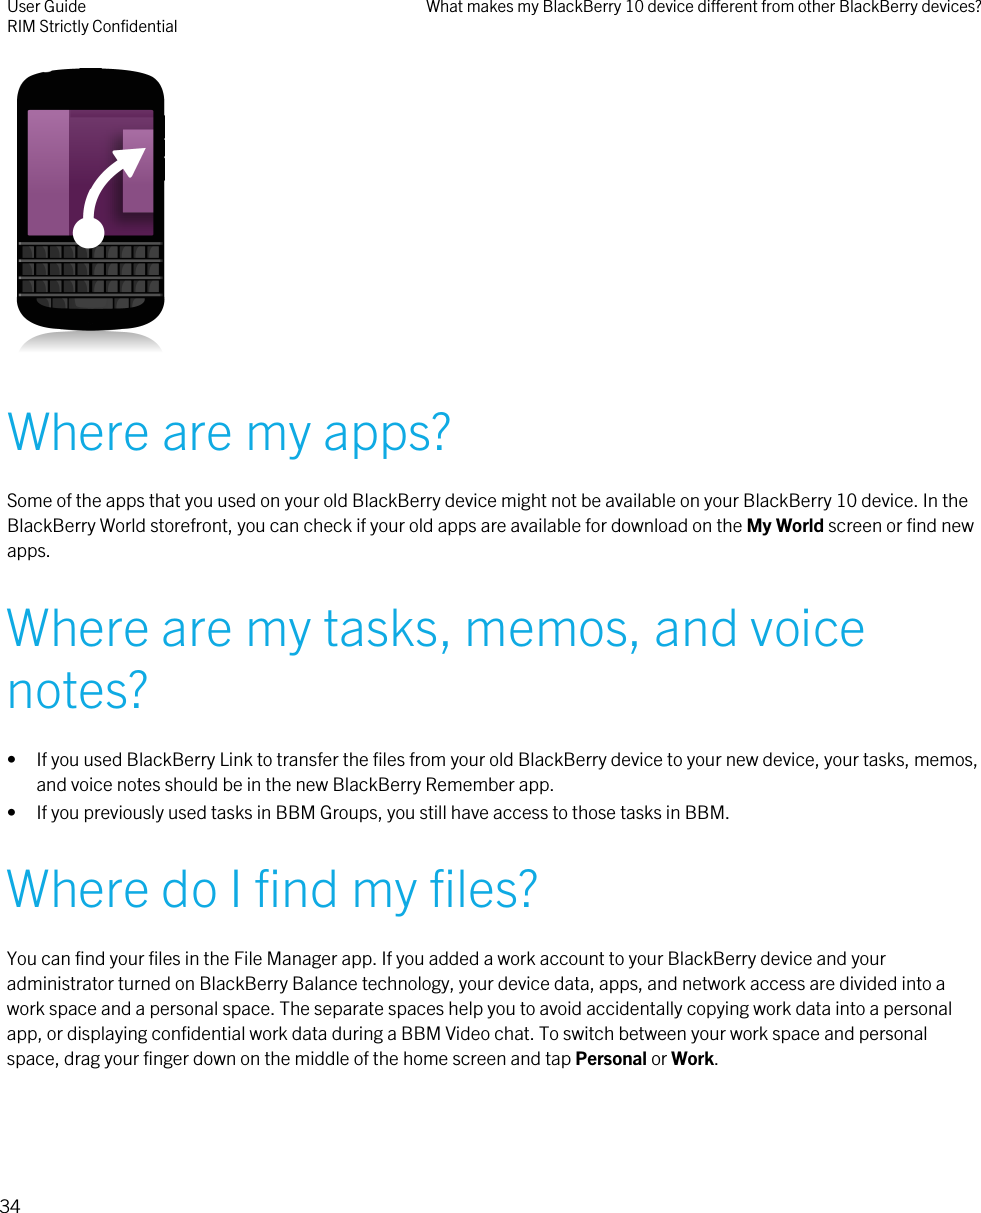  Where are my apps?Some of the apps that you used on your old BlackBerry device might not be available on your BlackBerry 10 device. In theBlackBerry World storefront, you can check if your old apps are available for download on the My World screen or find newapps.Where are my tasks, memos, and voicenotes?• If you used BlackBerry Link to transfer the files from your old BlackBerry device to your new device, your tasks, memos,and voice notes should be in the new BlackBerry Remember app.• If you previously used tasks in BBM Groups, you still have access to those tasks in BBM.Where do I find my files?You can find your files in the File Manager app. If you added a work account to your BlackBerry device and youradministrator turned on BlackBerry Balance technology, your device data, apps, and network access are divided into awork space and a personal space. The separate spaces help you to avoid accidentally copying work data into a personalapp, or displaying confidential work data during a BBM Video chat. To switch between your work space and personalspace, drag your finger down on the middle of the home screen and tap Personal or Work.User GuideRIM Strictly Confidential What makes my BlackBerry 10 device different from other BlackBerry devices?34